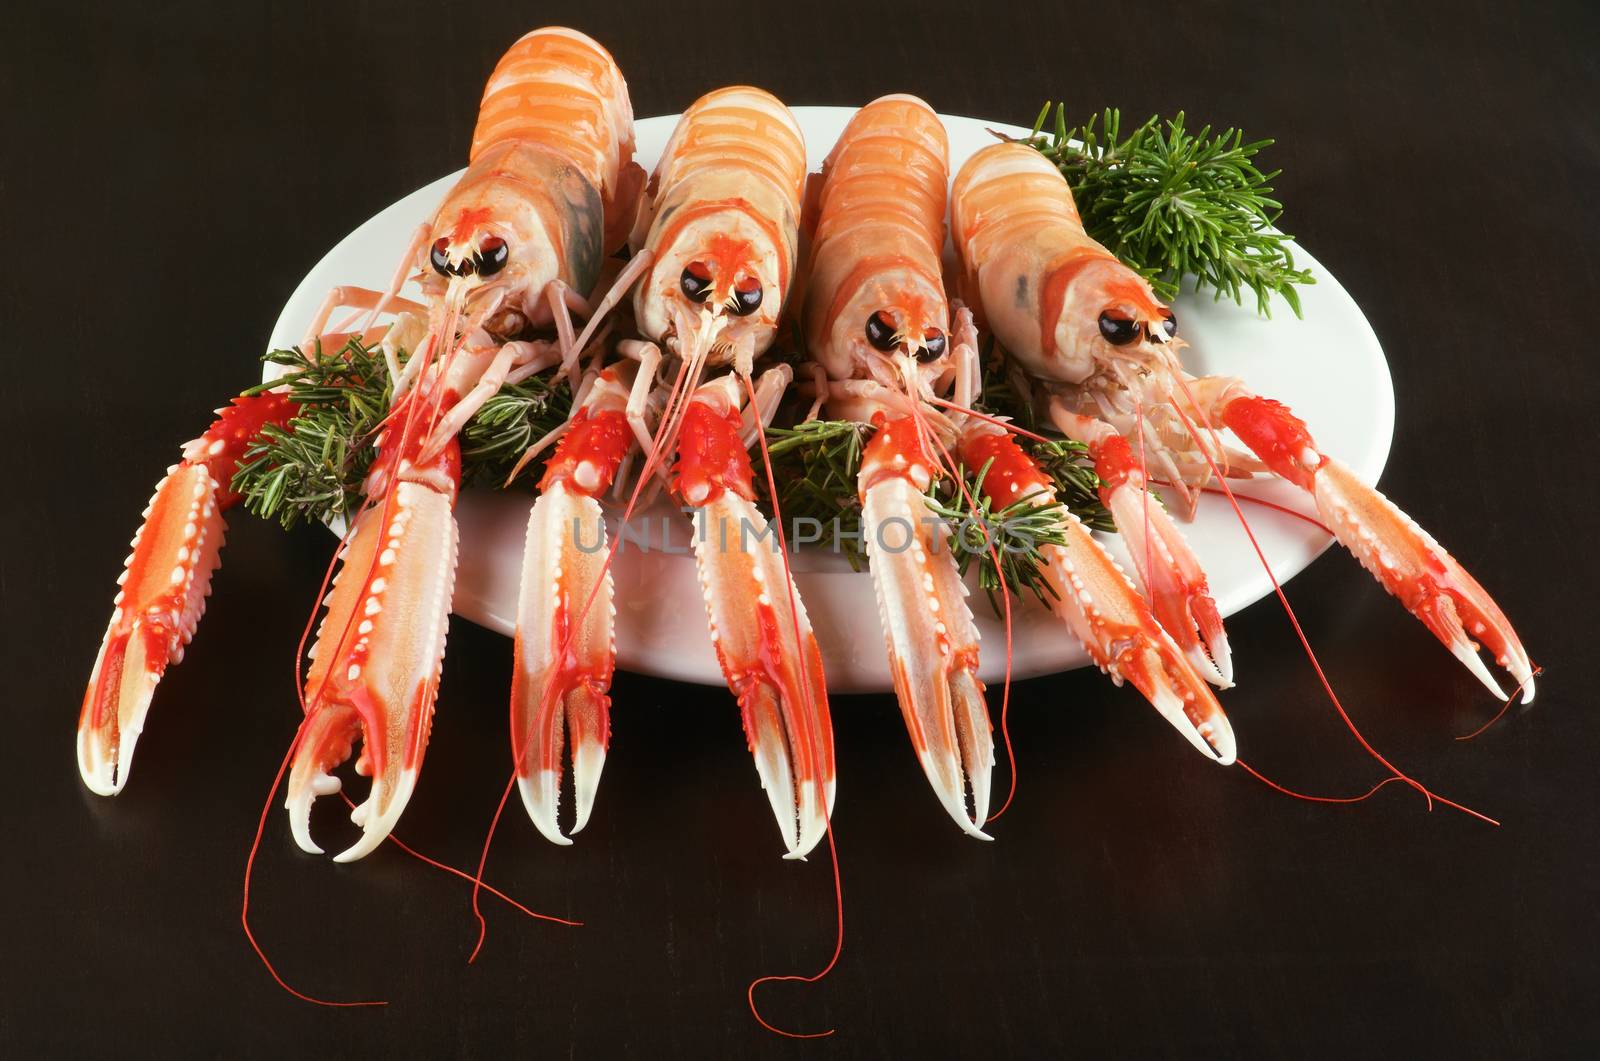 Four Delicious Raw Langoustines with Rosemary on White Plate closeup on Dark Wooden background